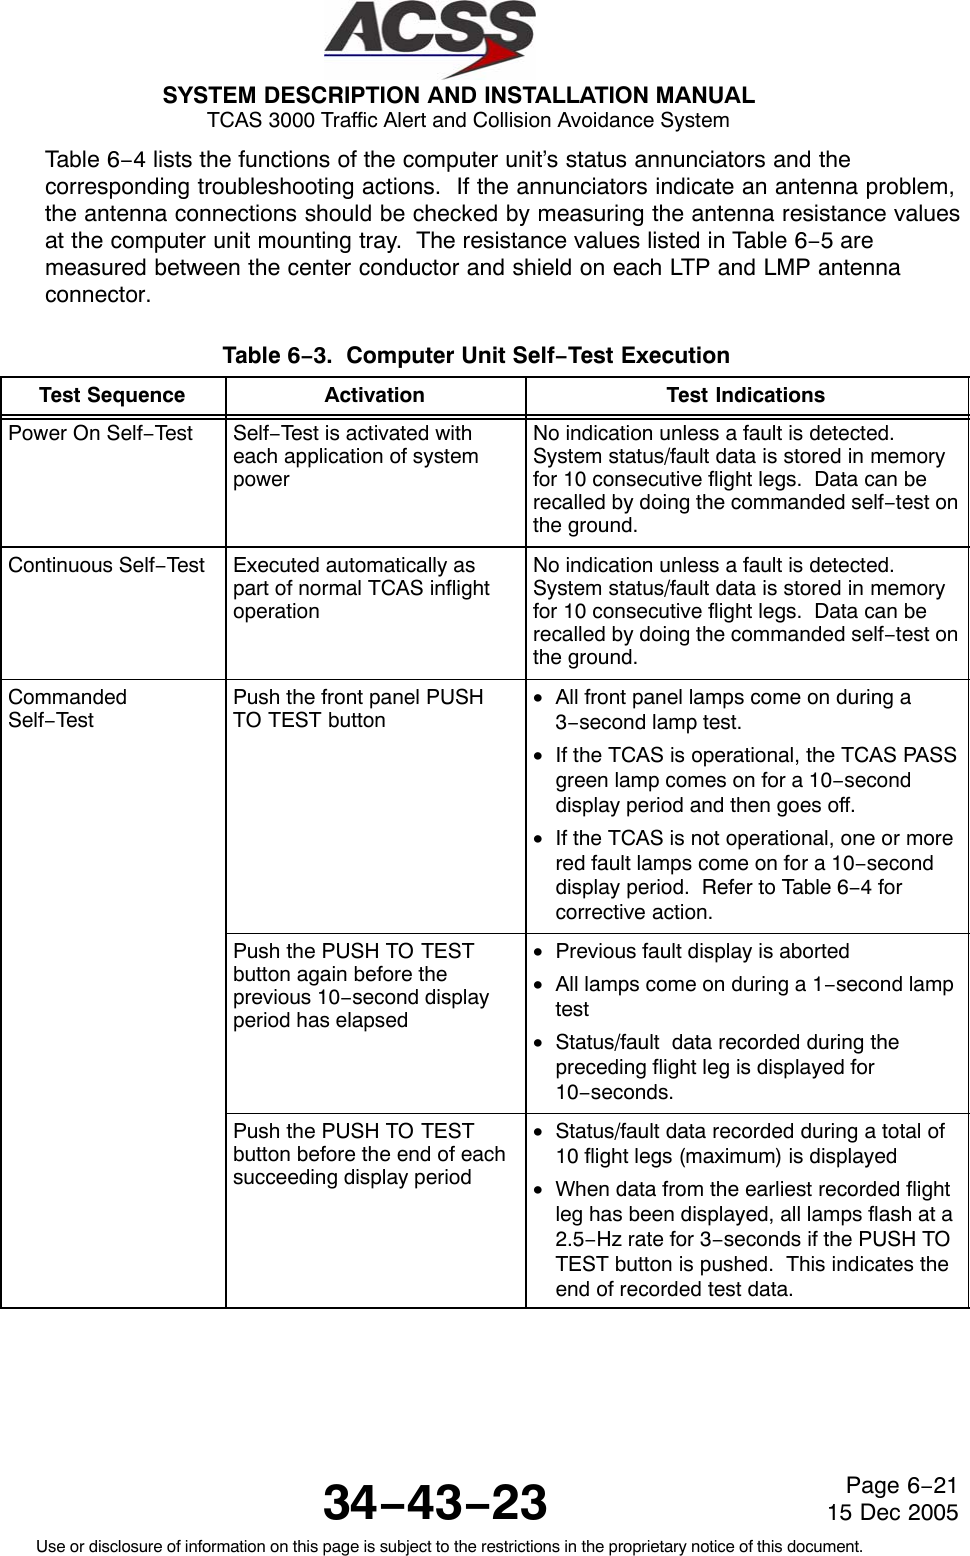 SYSTEM DESCRIPTION AND INSTALLATION MANUAL TCAS 3000 Traffic Alert and Collision Avoidance System34−43−23Use or disclosure of information on this page is subject to the restrictions in the proprietary notice of this document.Page 6−2115 Dec 2005Table 6−4 lists the functions of the computer unit’s status annunciators and thecorresponding troubleshooting actions.  If the annunciators indicate an antenna problem,the antenna connections should be checked by measuring the antenna resistance valuesat the computer unit mounting tray.  The resistance values listed in Table 6−5 aremeasured between the center conductor and shield on each LTP and LMP antennaconnector.Table 6−3.  Computer Unit Self−Test Execution  Test Sequence Activation Test IndicationsPower On Self−Test Self−Test is activated witheach application of systempowerNo indication unless a fault is detected.System status/fault data is stored in memoryfor 10 consecutive flight legs.  Data can berecalled by doing the commanded self−test onthe ground.Continuous Self−Test Executed automatically aspart of normal TCAS inflightoperationNo indication unless a fault is detected.System status/fault data is stored in memoryfor 10 consecutive flight legs.  Data can berecalled by doing the commanded self−test onthe ground.CommandedSelf−TestPush the front panel PUSHTO TEST button•All front panel lamps come on during a3−second lamp test.•If the TCAS is operational, the TCAS PASSgreen lamp comes on for a 10−seconddisplay period and then goes off.•If the TCAS is not operational, one or morered fault lamps come on for a 10−seconddisplay period.  Refer to Table 6−4 forcorrective action.Push the PUSH TO TESTbutton again before theprevious 10−second displayperiod has elapsed•Previous fault display is aborted•All lamps come on during a 1−second lamptest•Status/fault  data recorded during thepreceding flight leg is displayed for10−seconds.Push the PUSH TO TESTbutton before the end of eachsucceeding display period•Status/fault data recorded during a total of10 flight legs (maximum) is displayed•When data from the earliest recorded flightleg has been displayed, all lamps flash at a2.5−Hz rate for 3−seconds if the PUSH TOTEST button is pushed.  This indicates theend of recorded test data.